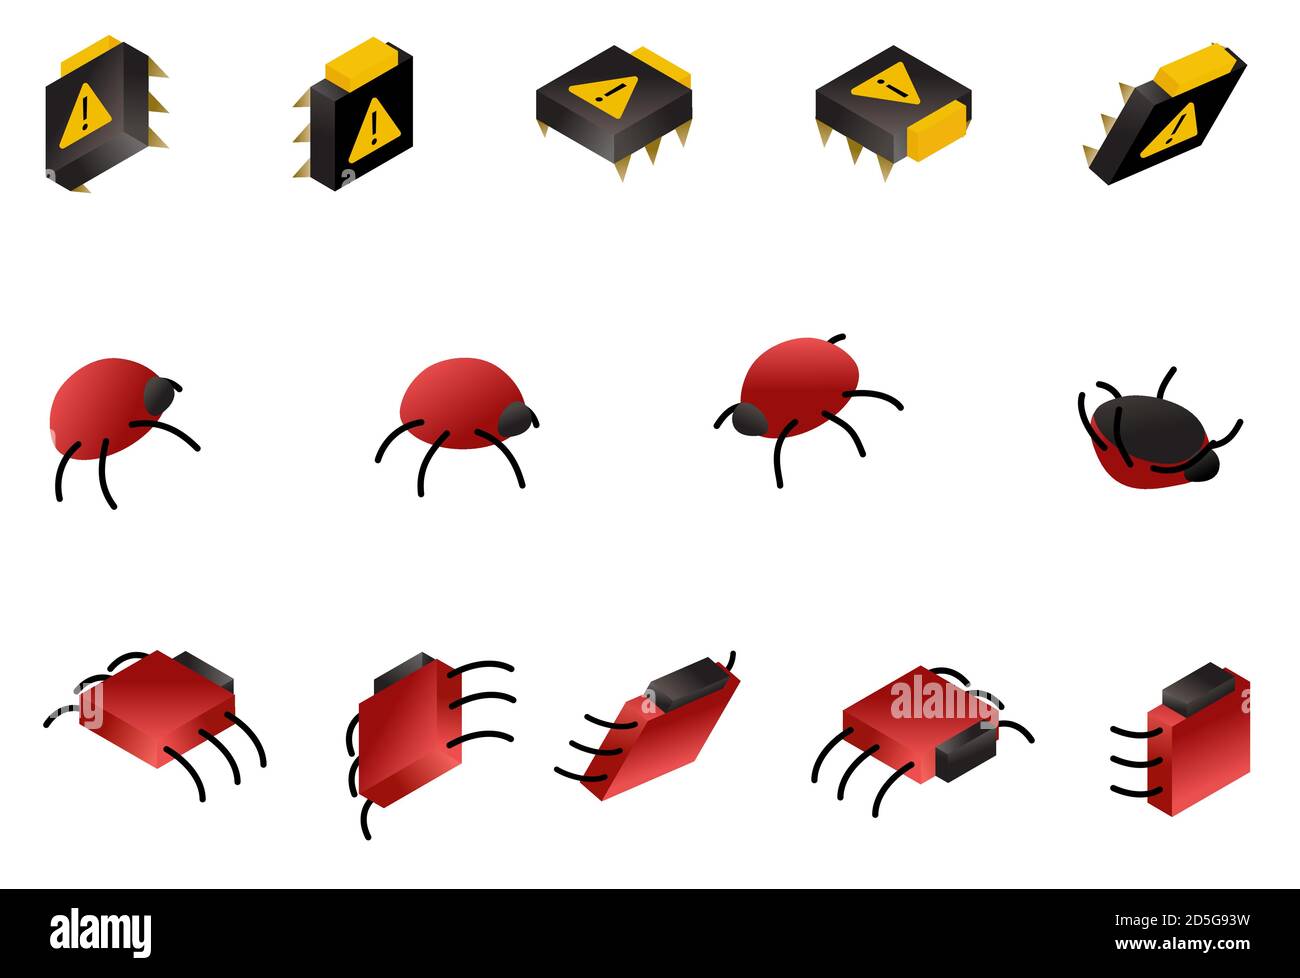 Computer bug isometric icon set isolated on white. Symbols of digital virus and glitch. Vector data danger concept illustration. Stock Vector